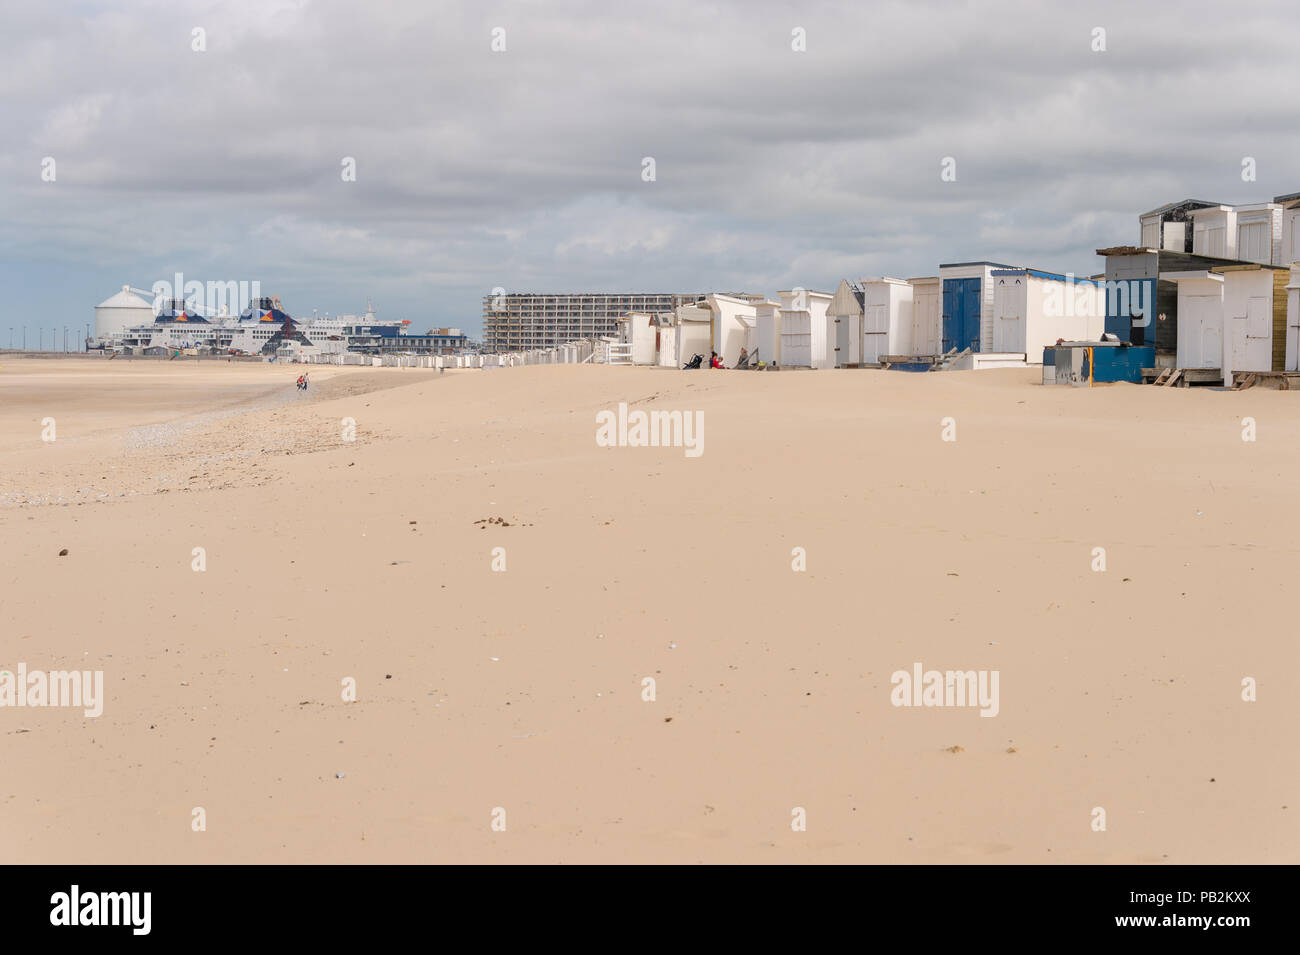 Calais, France - 19 June 2018: Beach cabins on the sand in the summertime Stock Photo